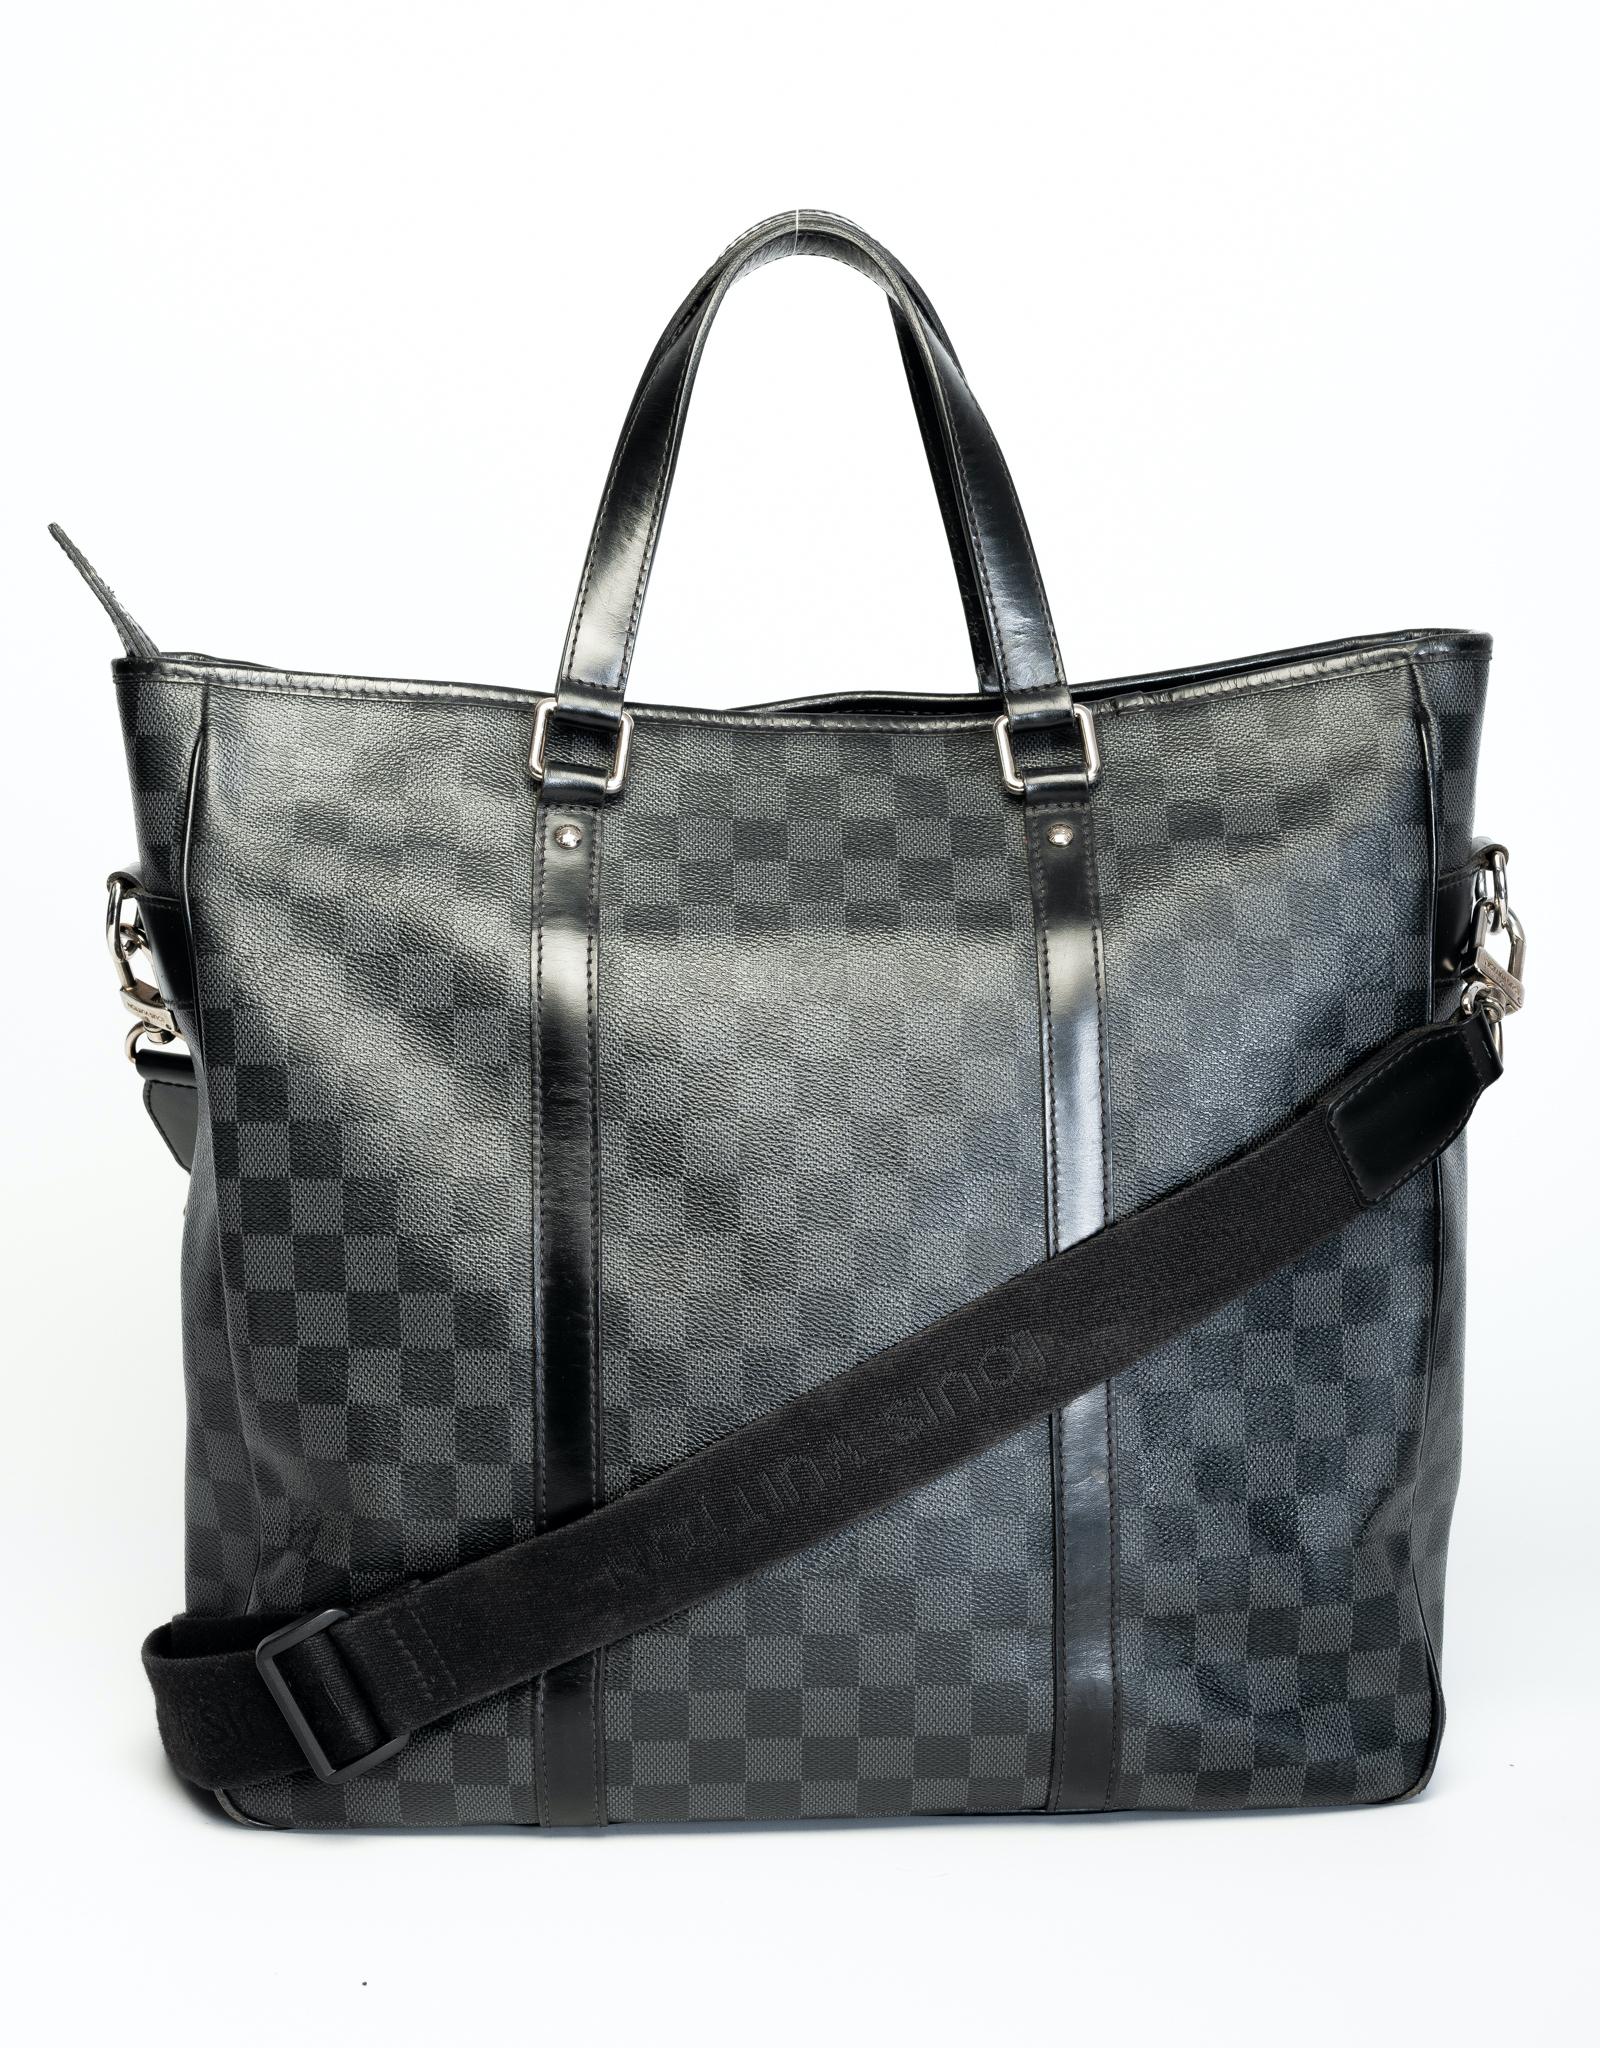 This LV Tadao bag from the from the 2011 Collection is made with Damier Graphite coated canvas and features silver-tone hardware, black leather trim, detachable logo shoulder strap, dual rolled leather top handles and black woven fabric interior